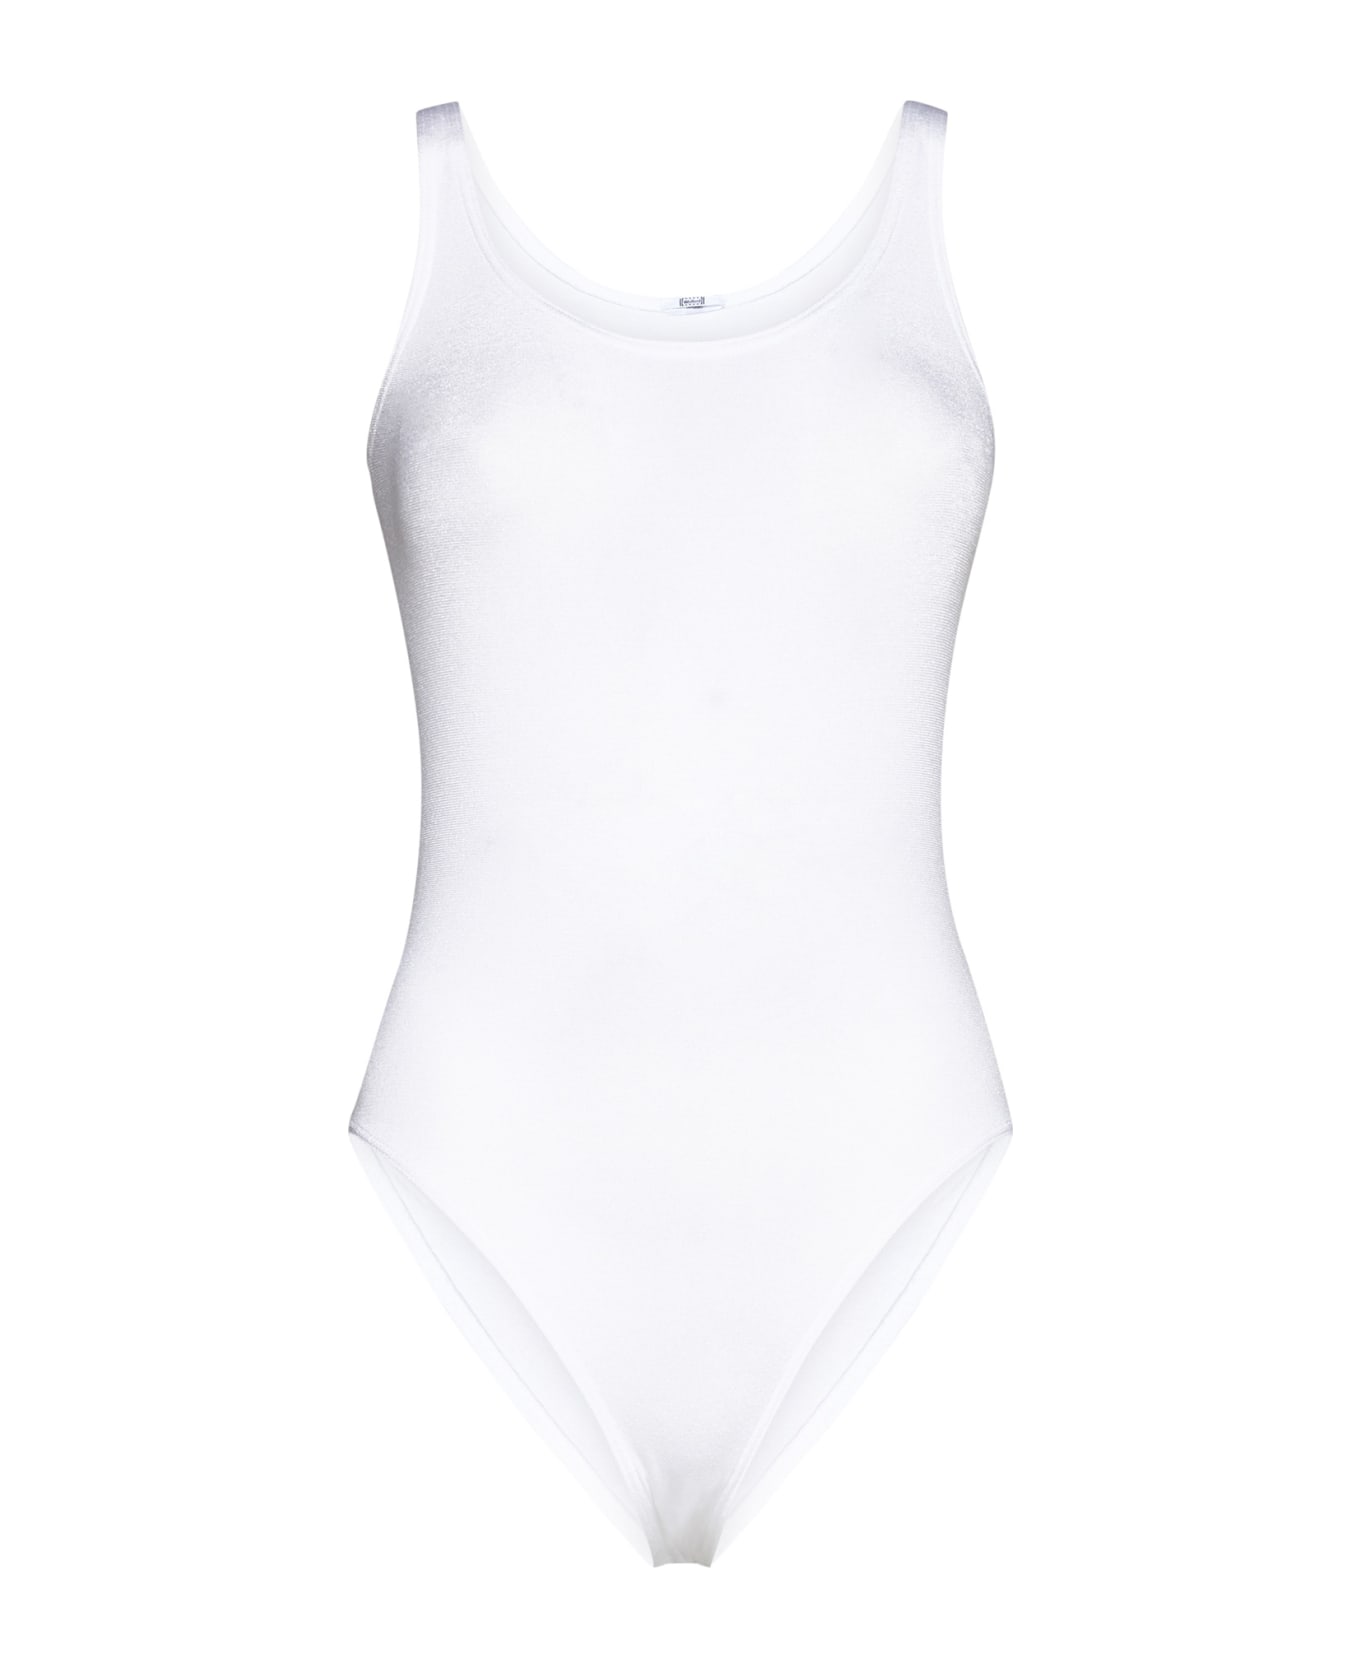 Wolford Top - White